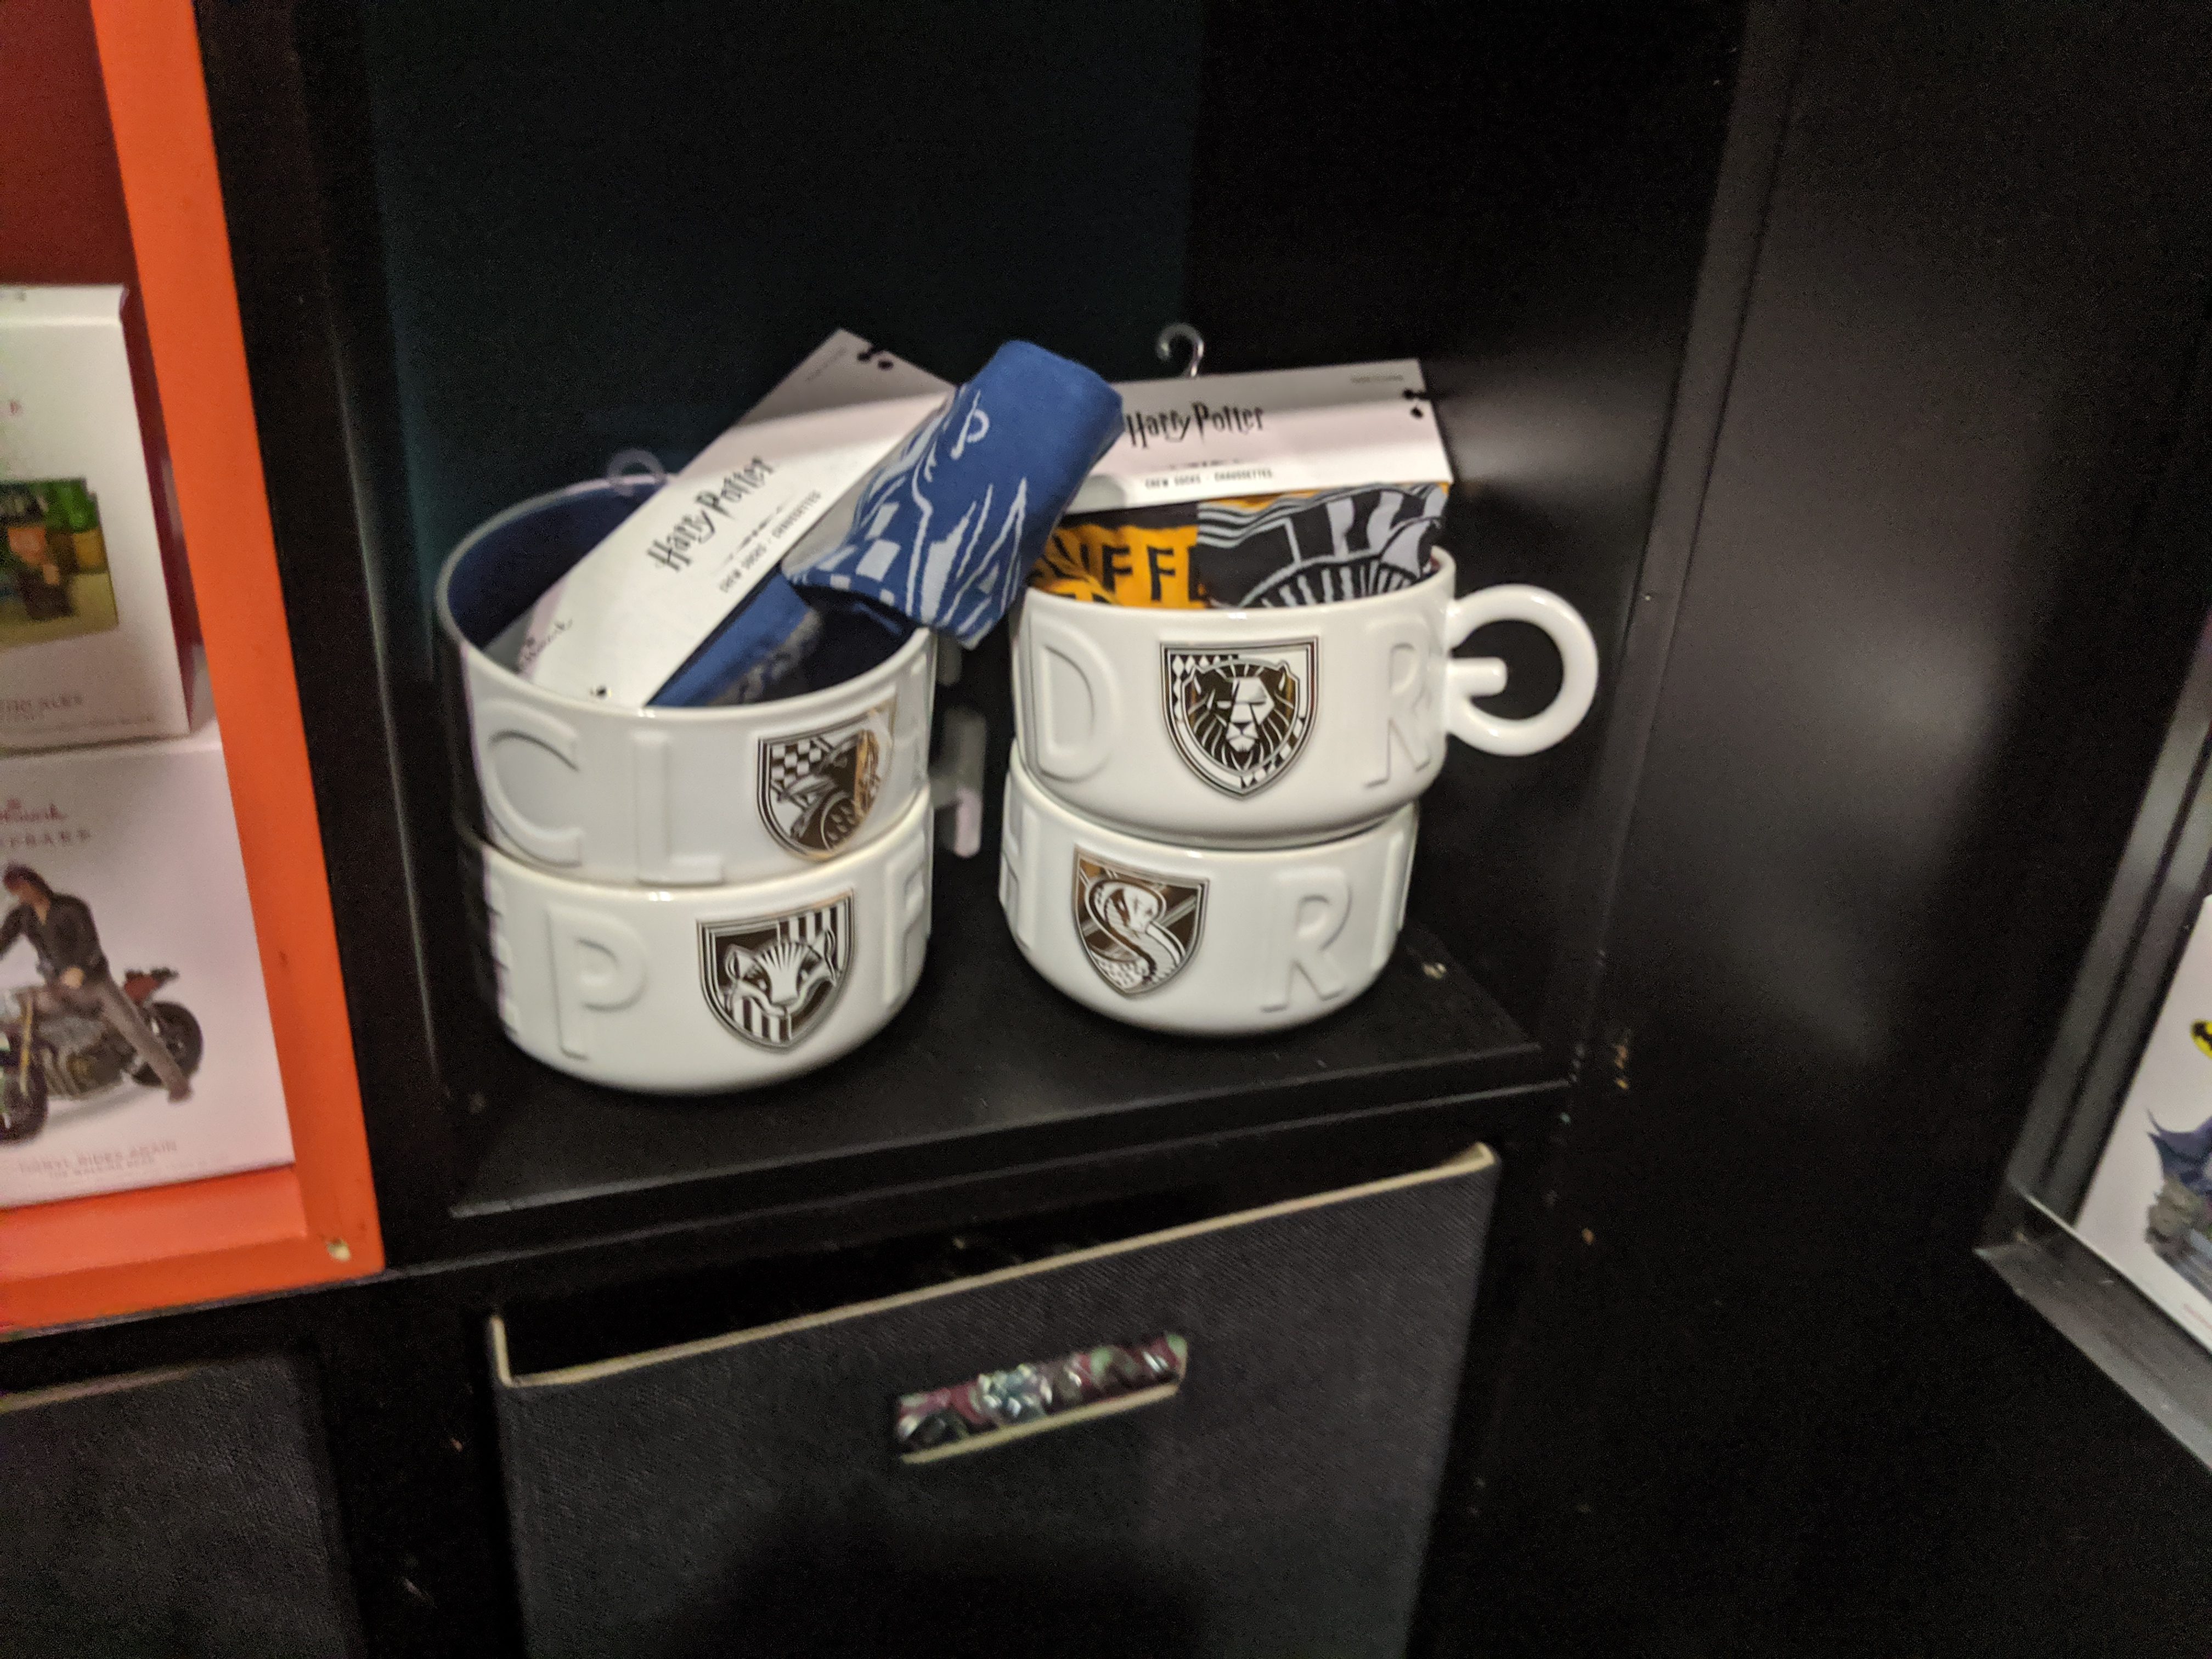 House-themed mugs are available at the PopMinded by Hallmark booth.